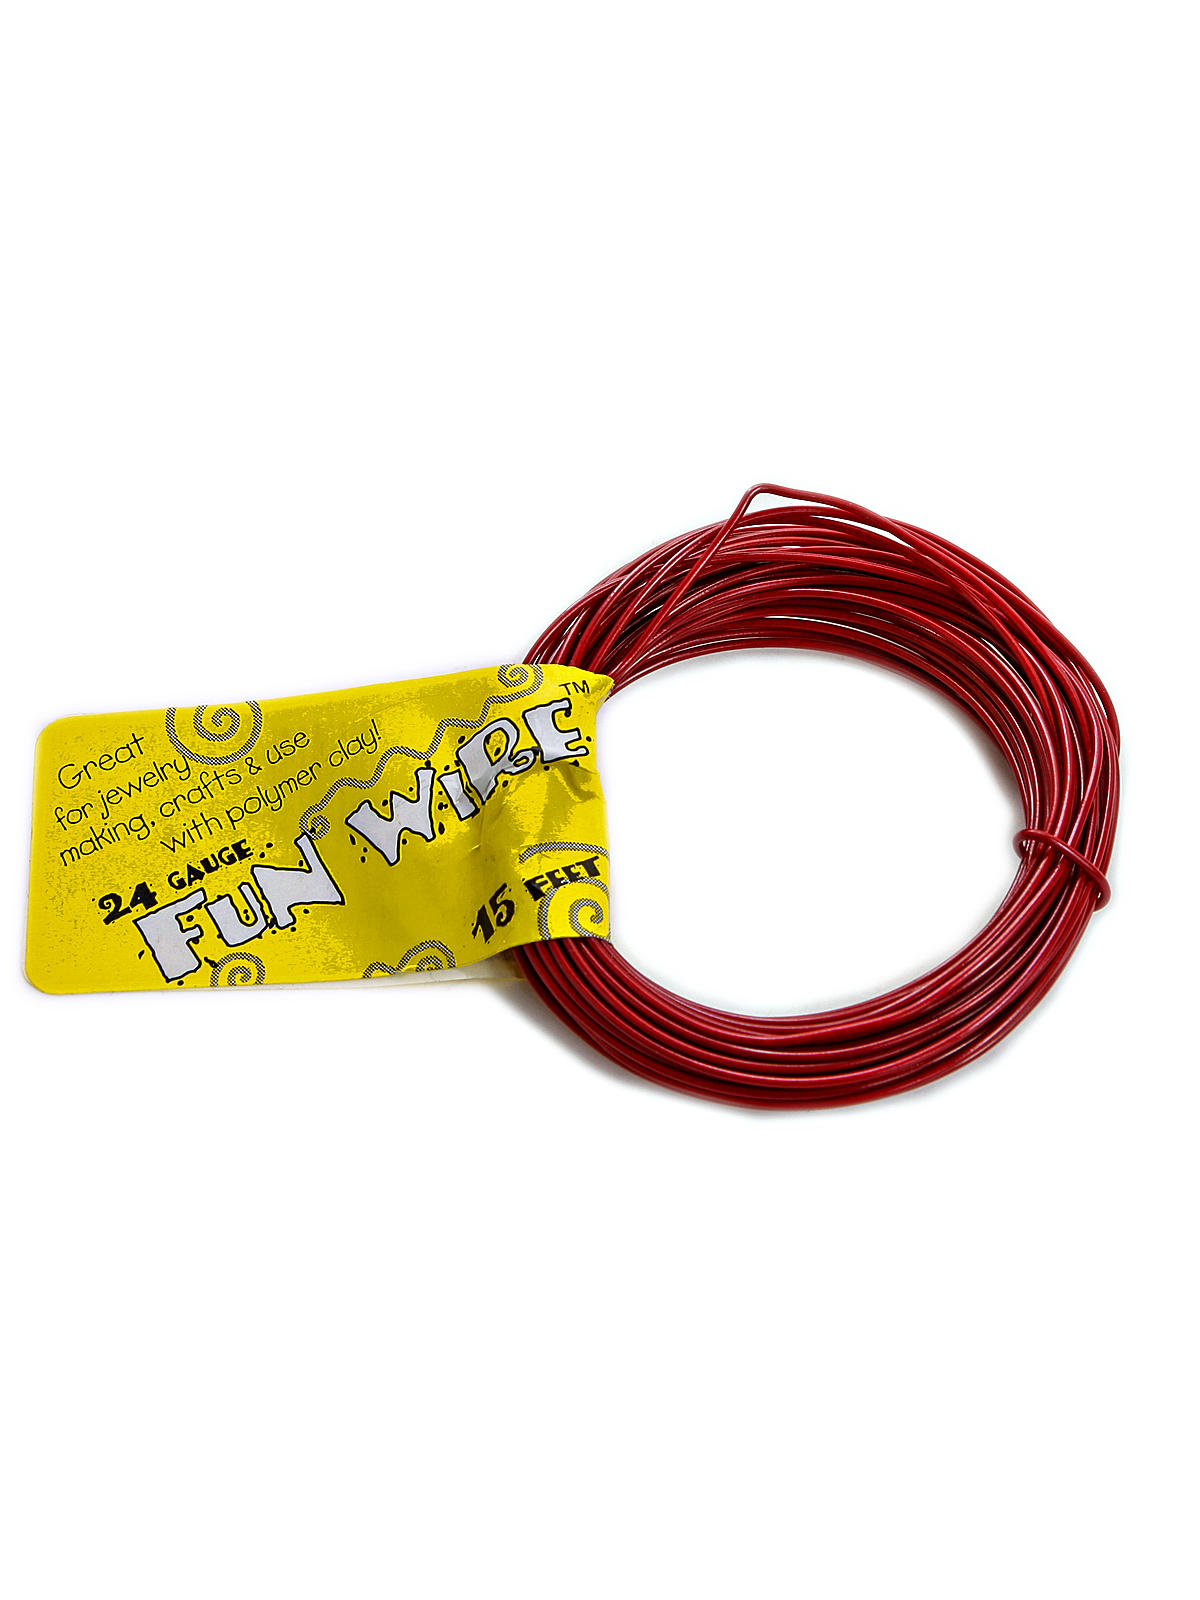 Fun Wire 24 Gauge Candy Apple 15 Ft.